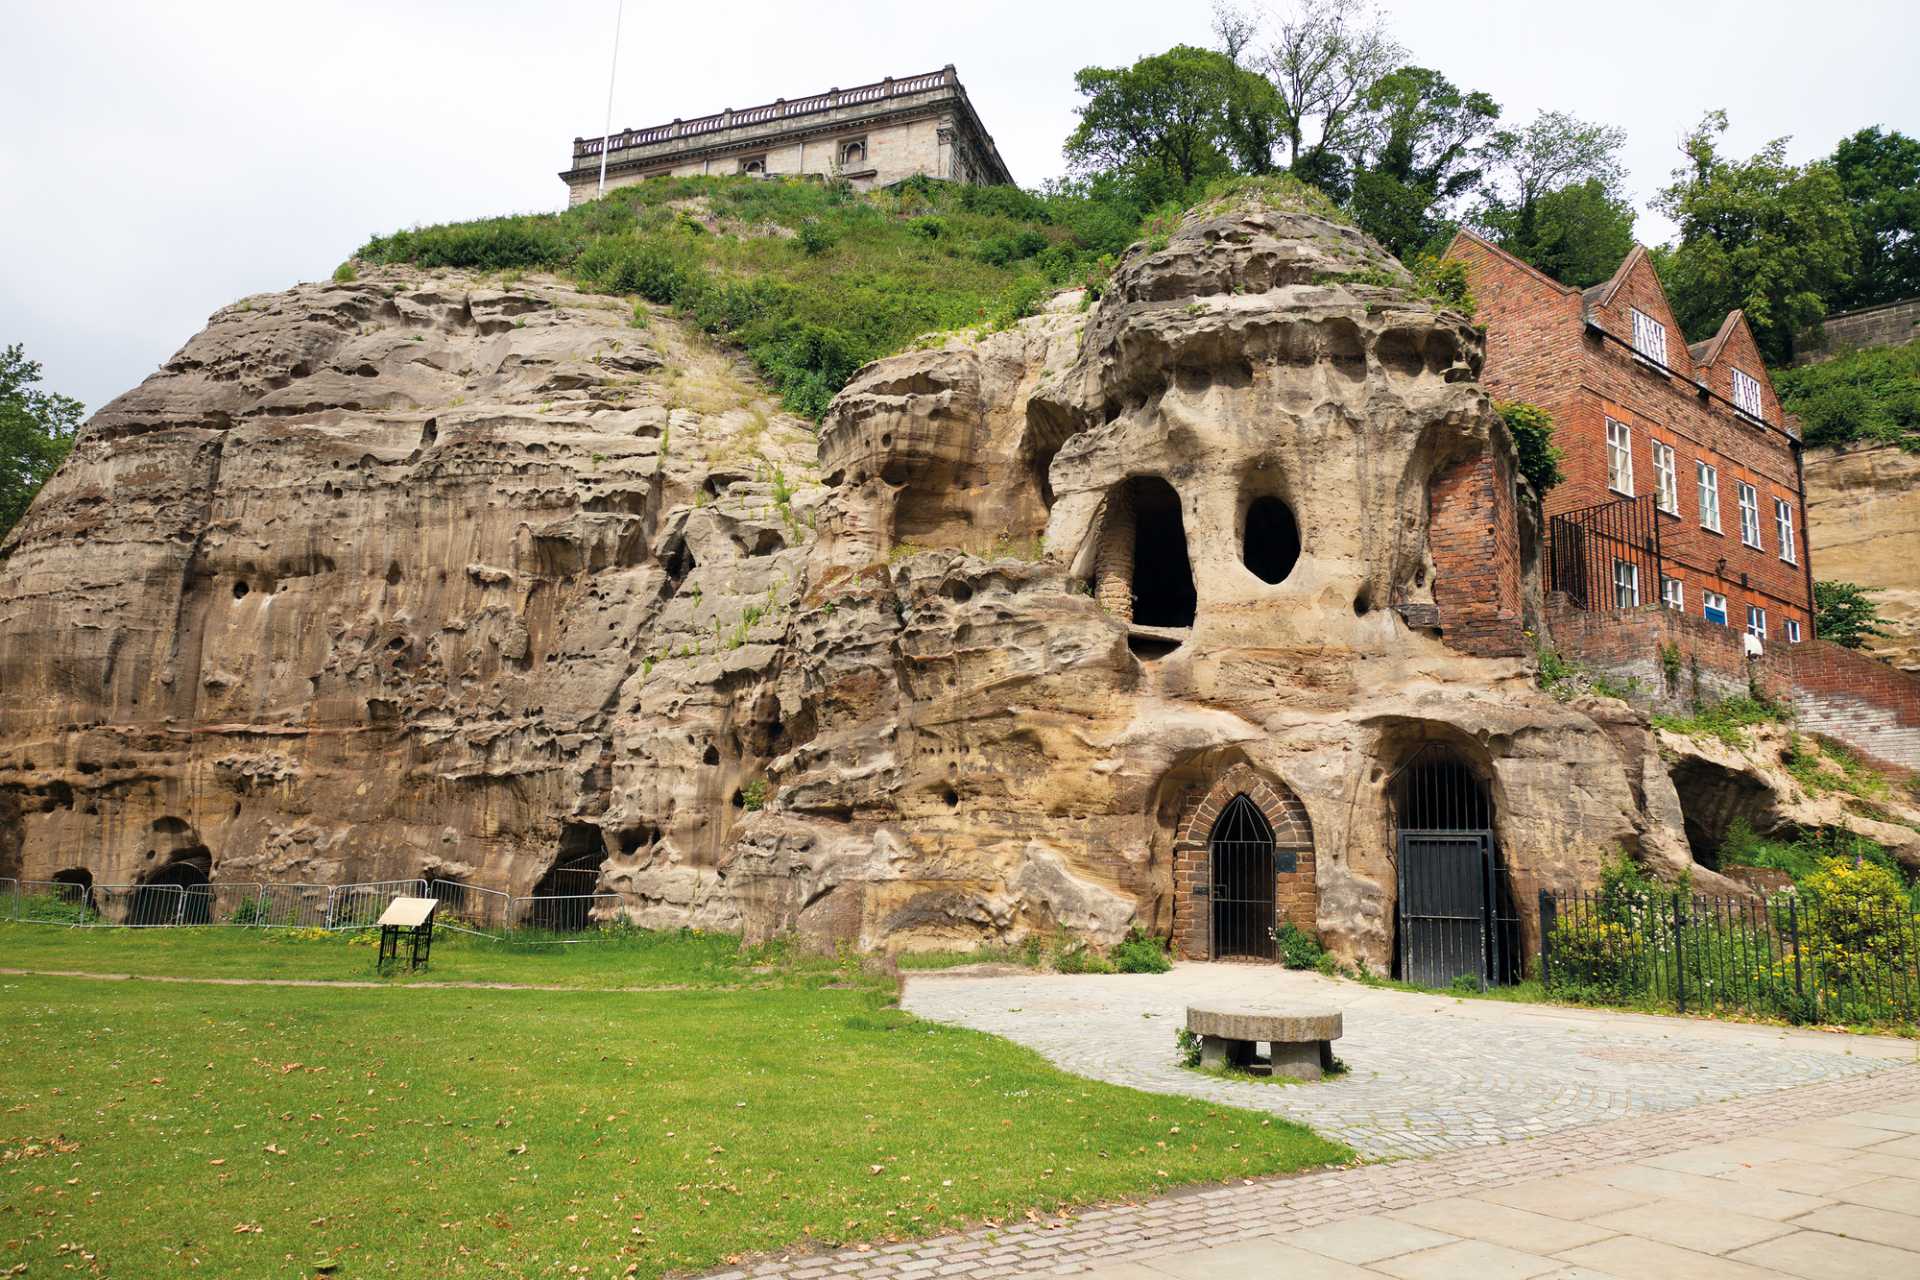 caves-inside-hillside-city-of-caves-places-to-visit-in-nottingham